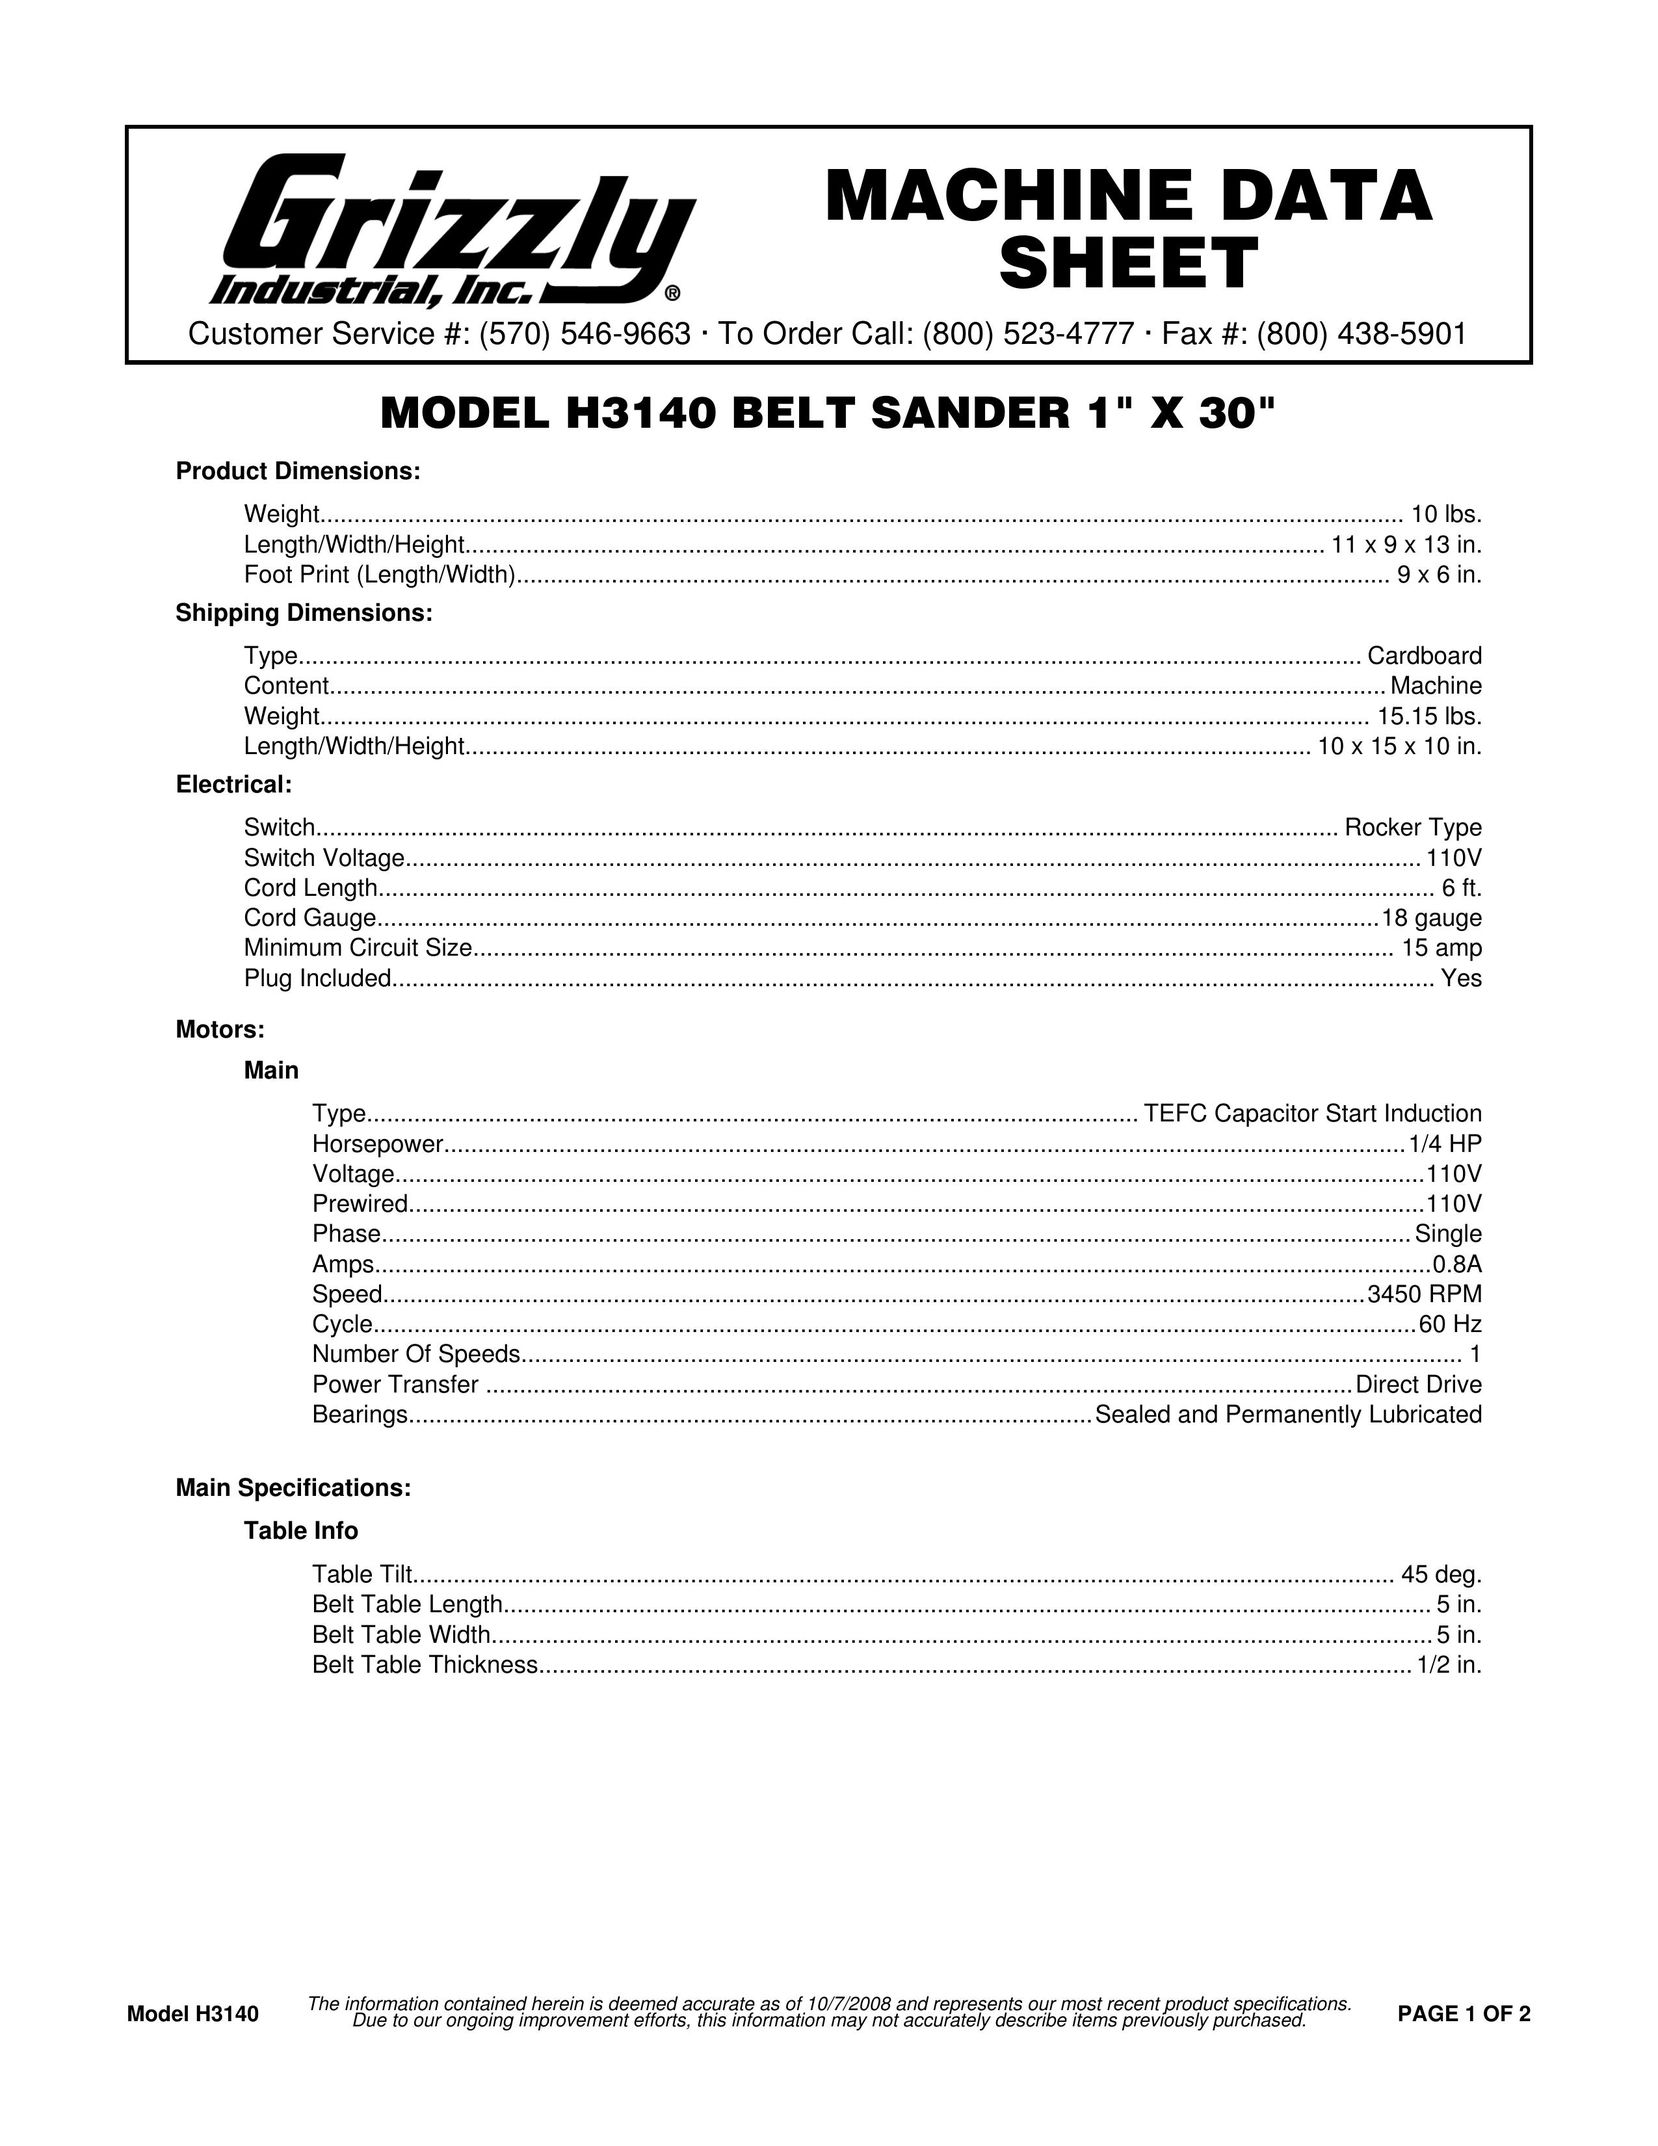 Grizzly FTP-80X Sander User Manual